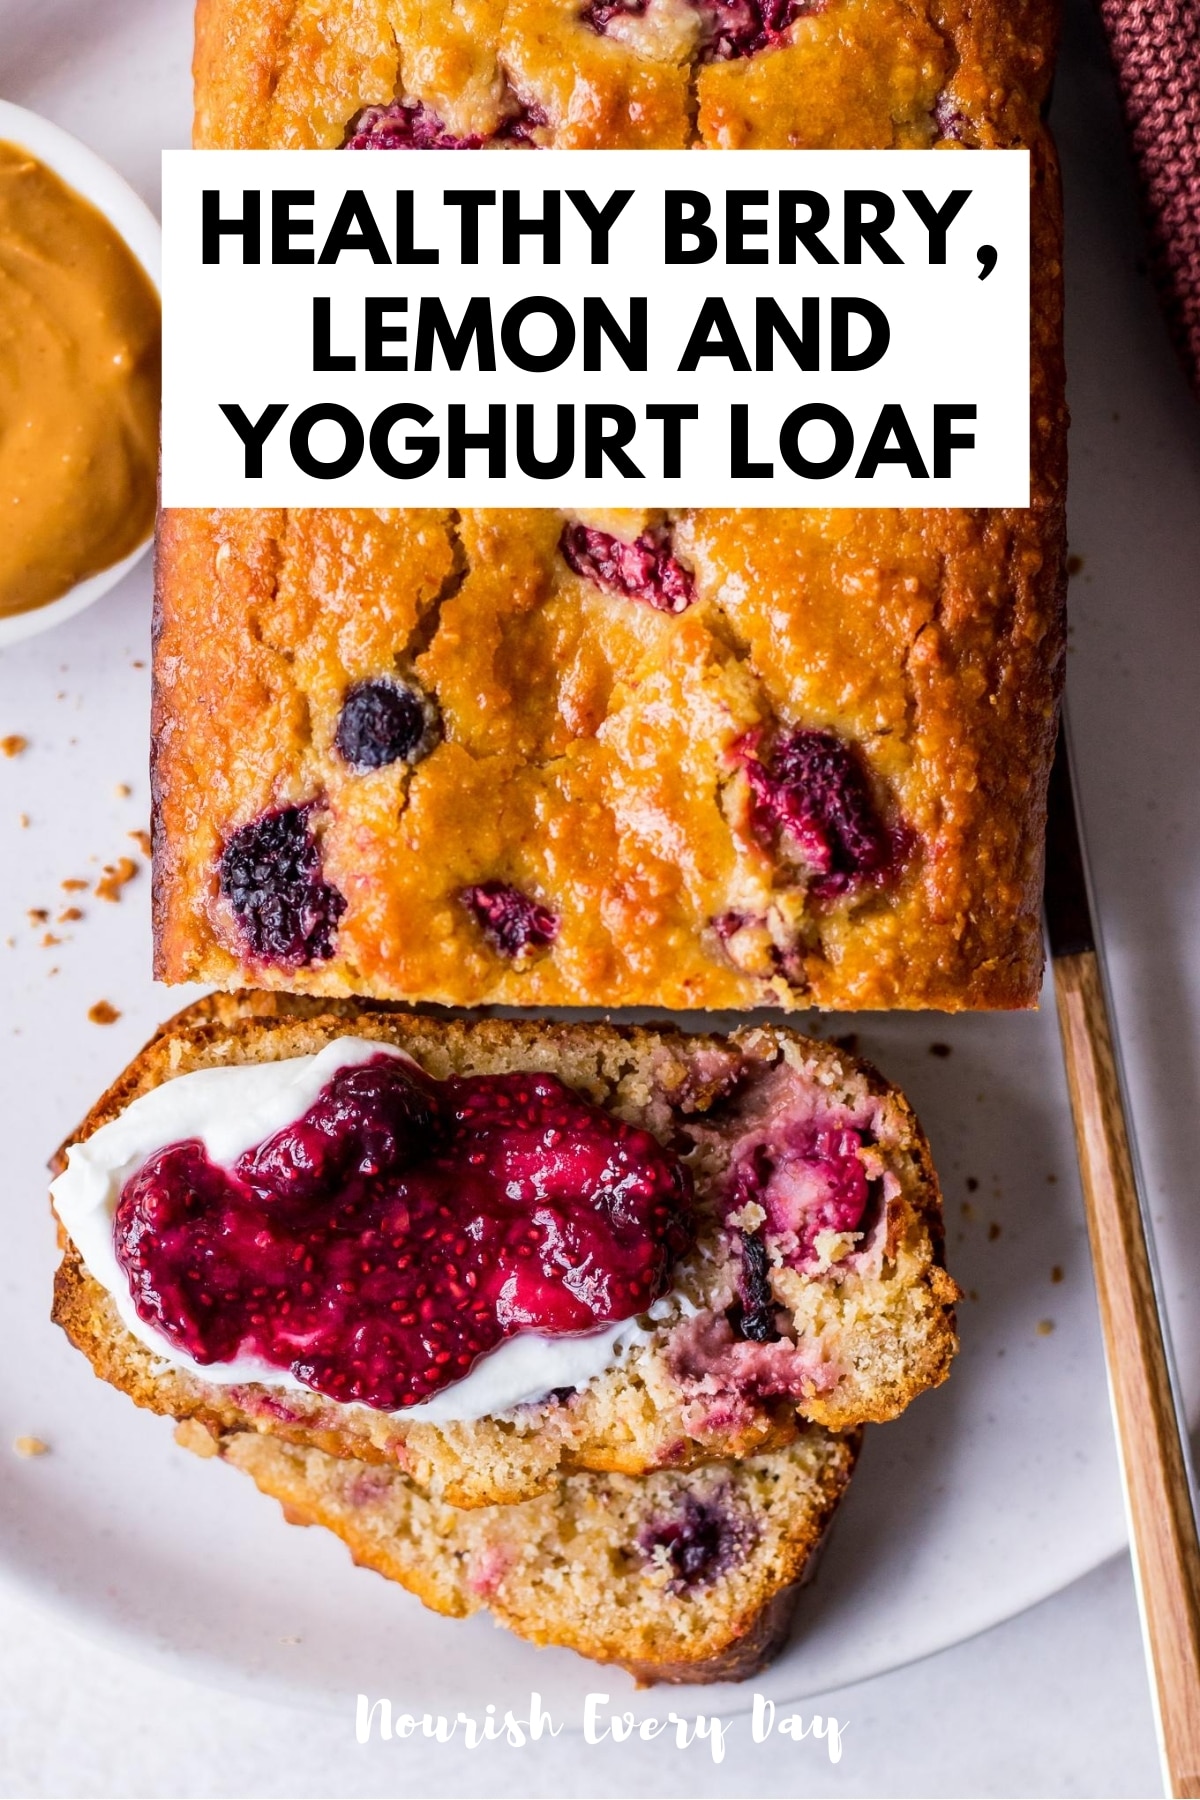 Berry, Lemon and Yoghurt Loaf by Nourish Every Day